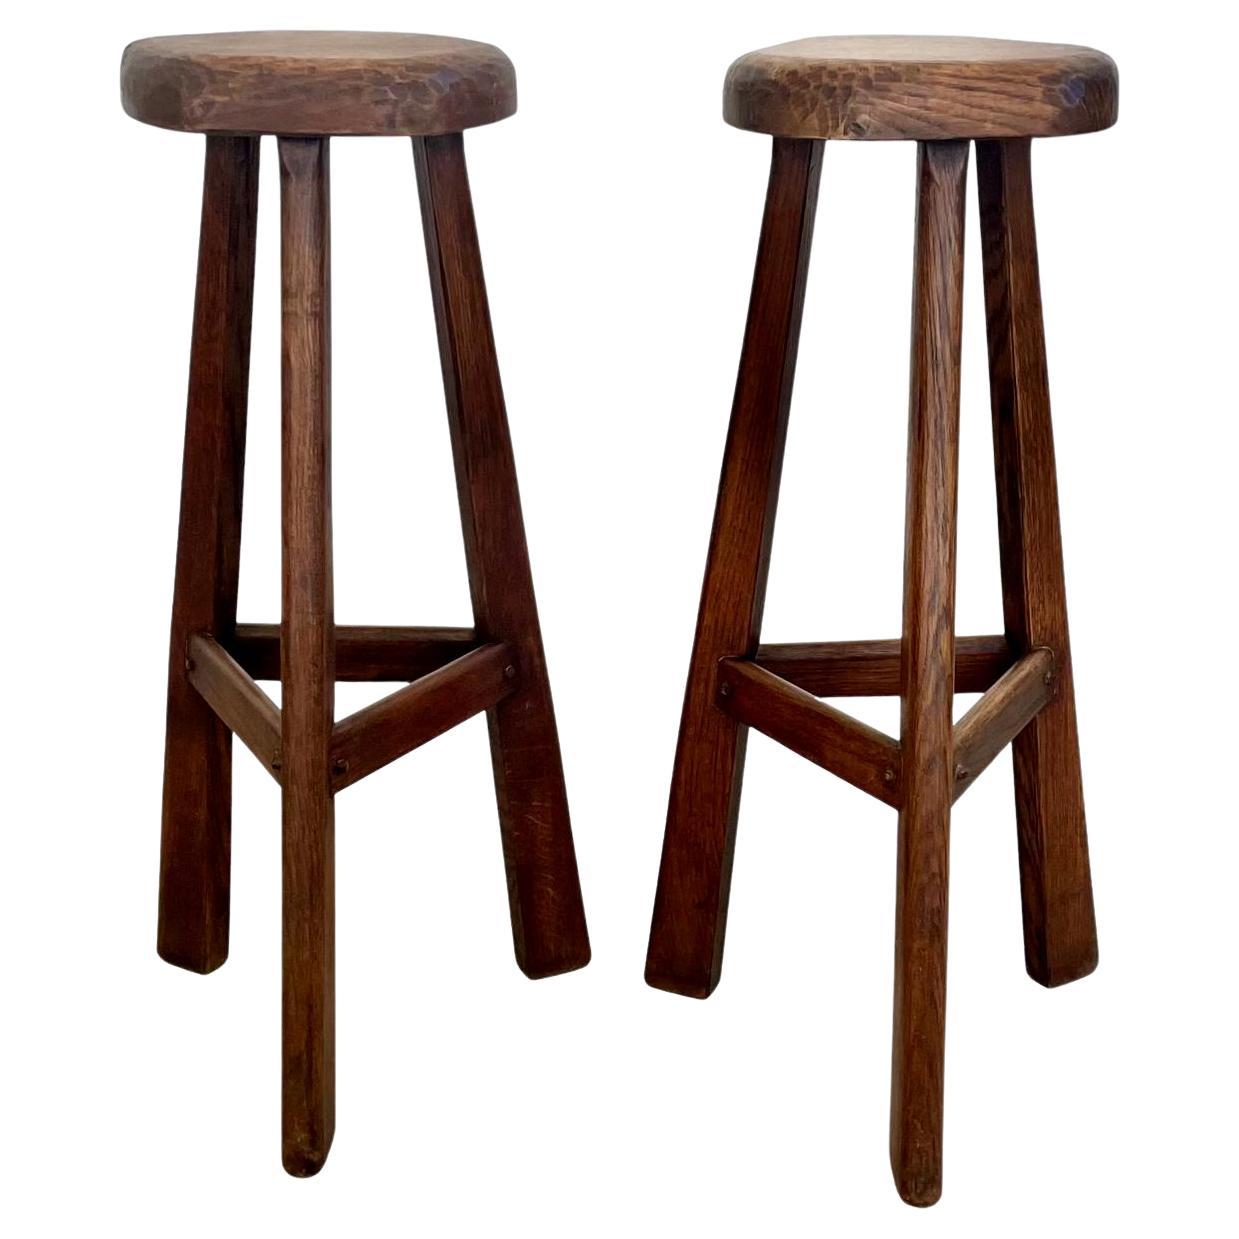 Pair of Tall Brutalist Wood Stools, 1960s France For Sale